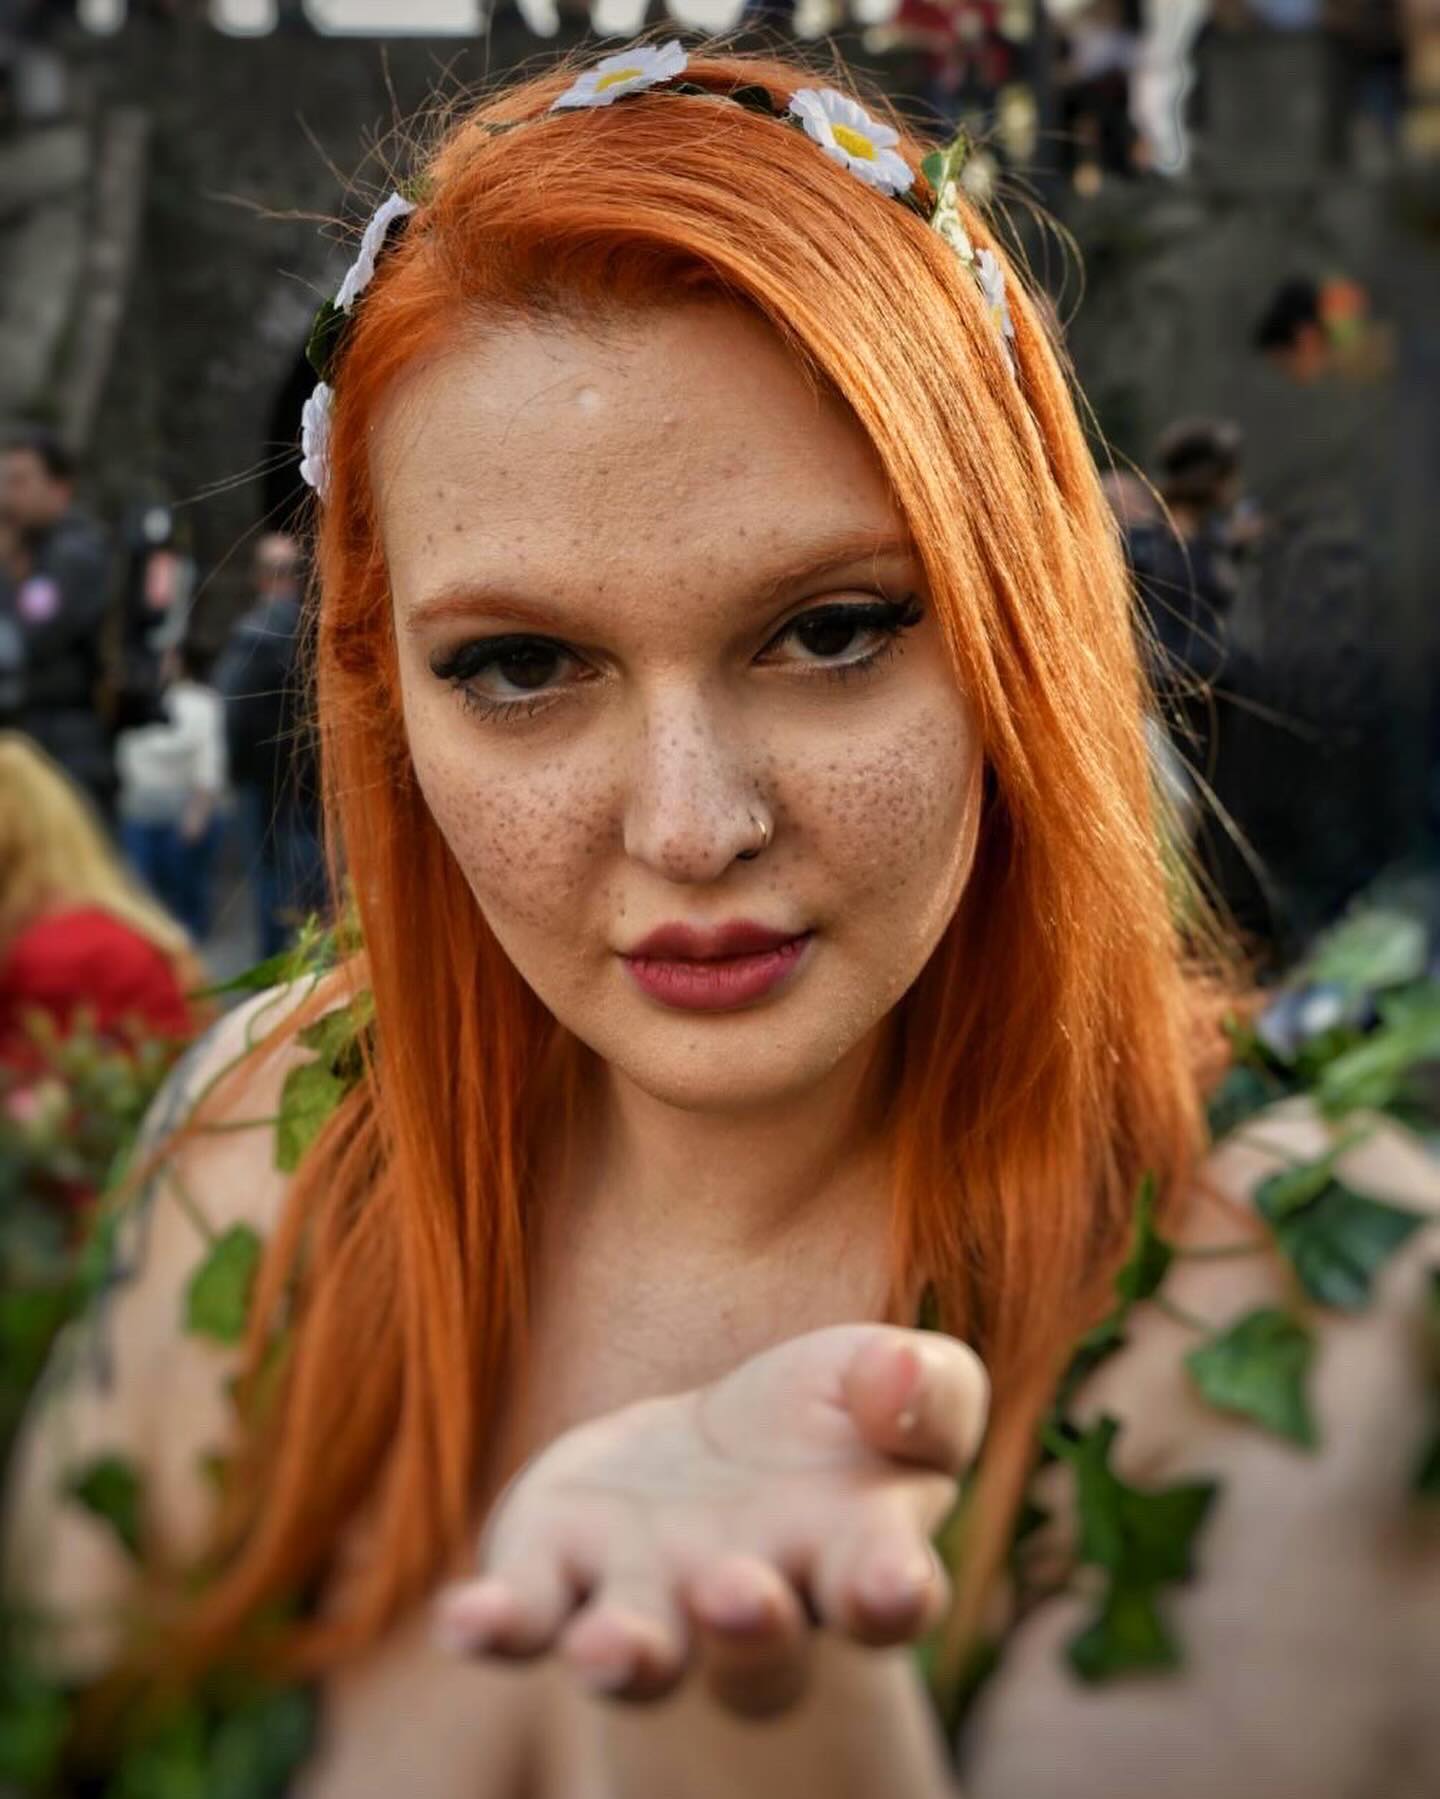 Poison ivy cosplay
Some pics at @luccacomicsandgames